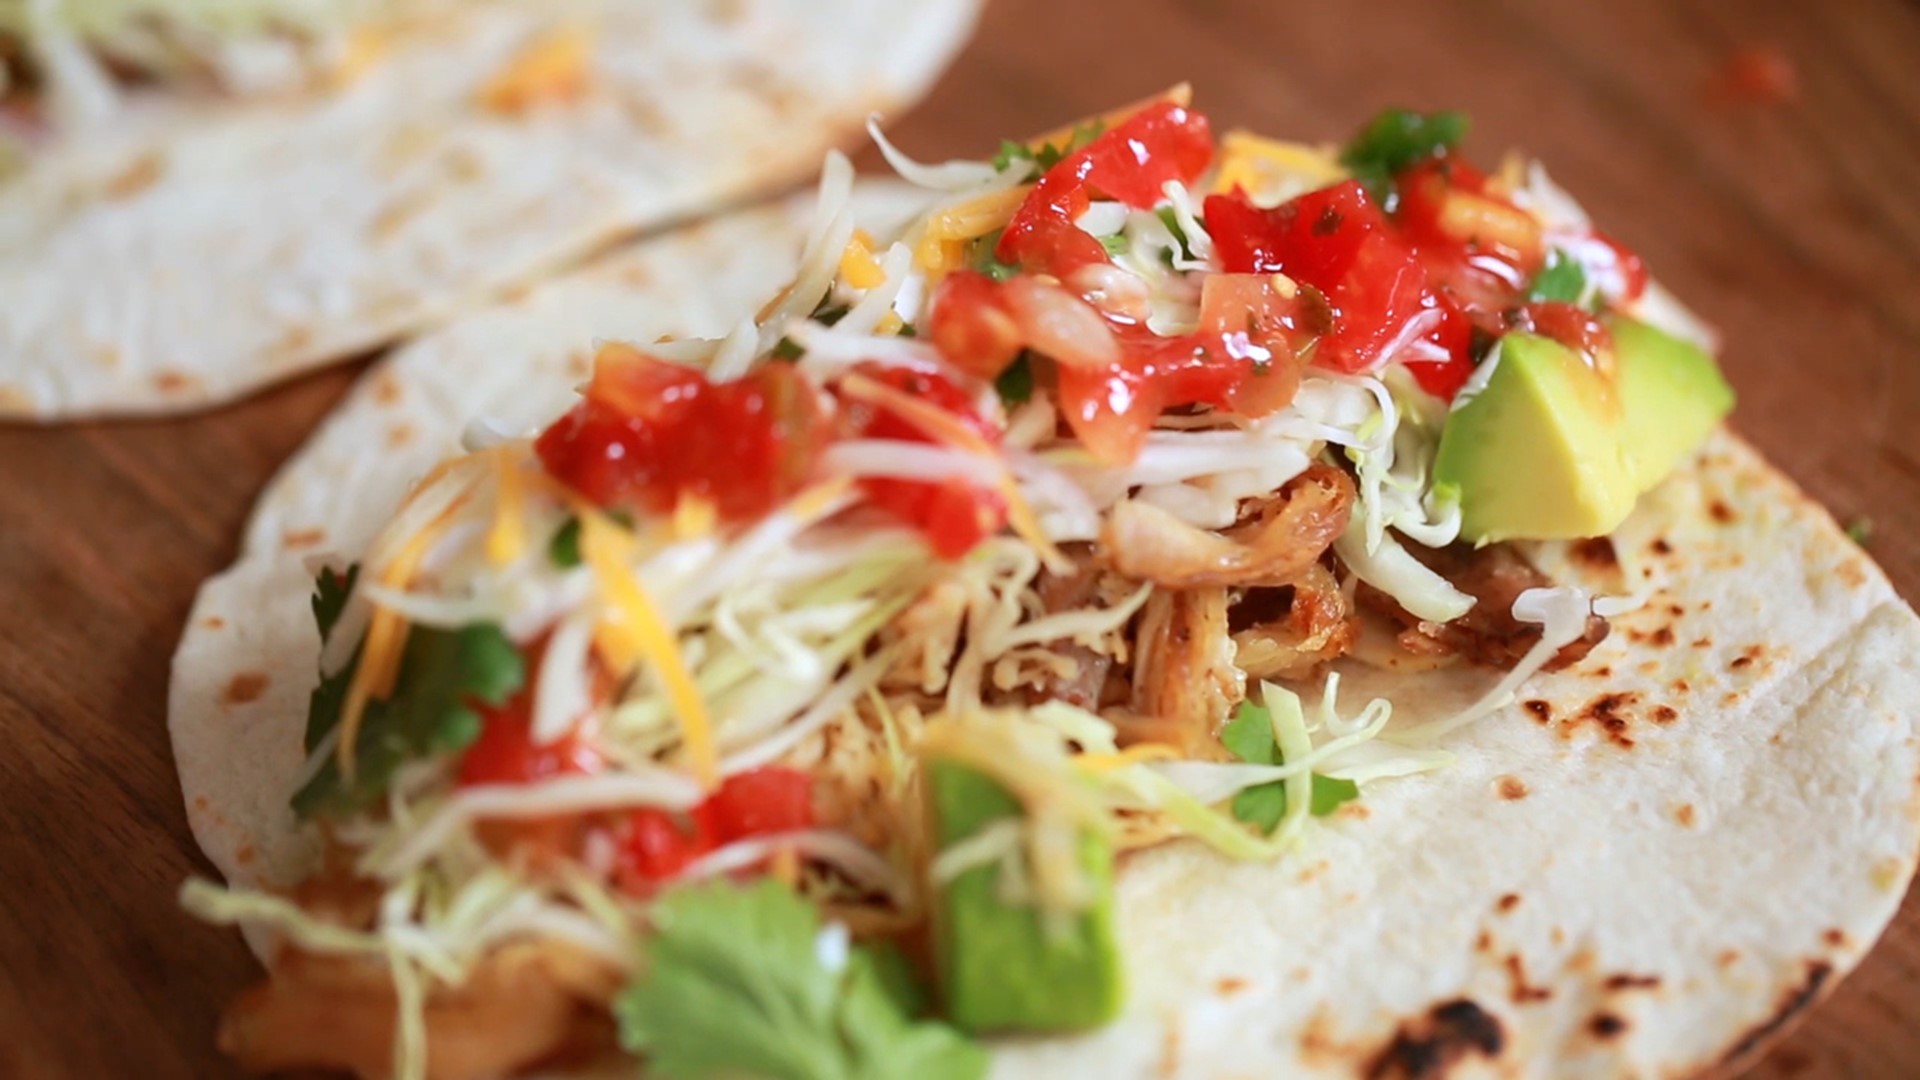 Make it a Taco night! Your family will love these and you'll be happy knowing they're packed with healthy ingredients.